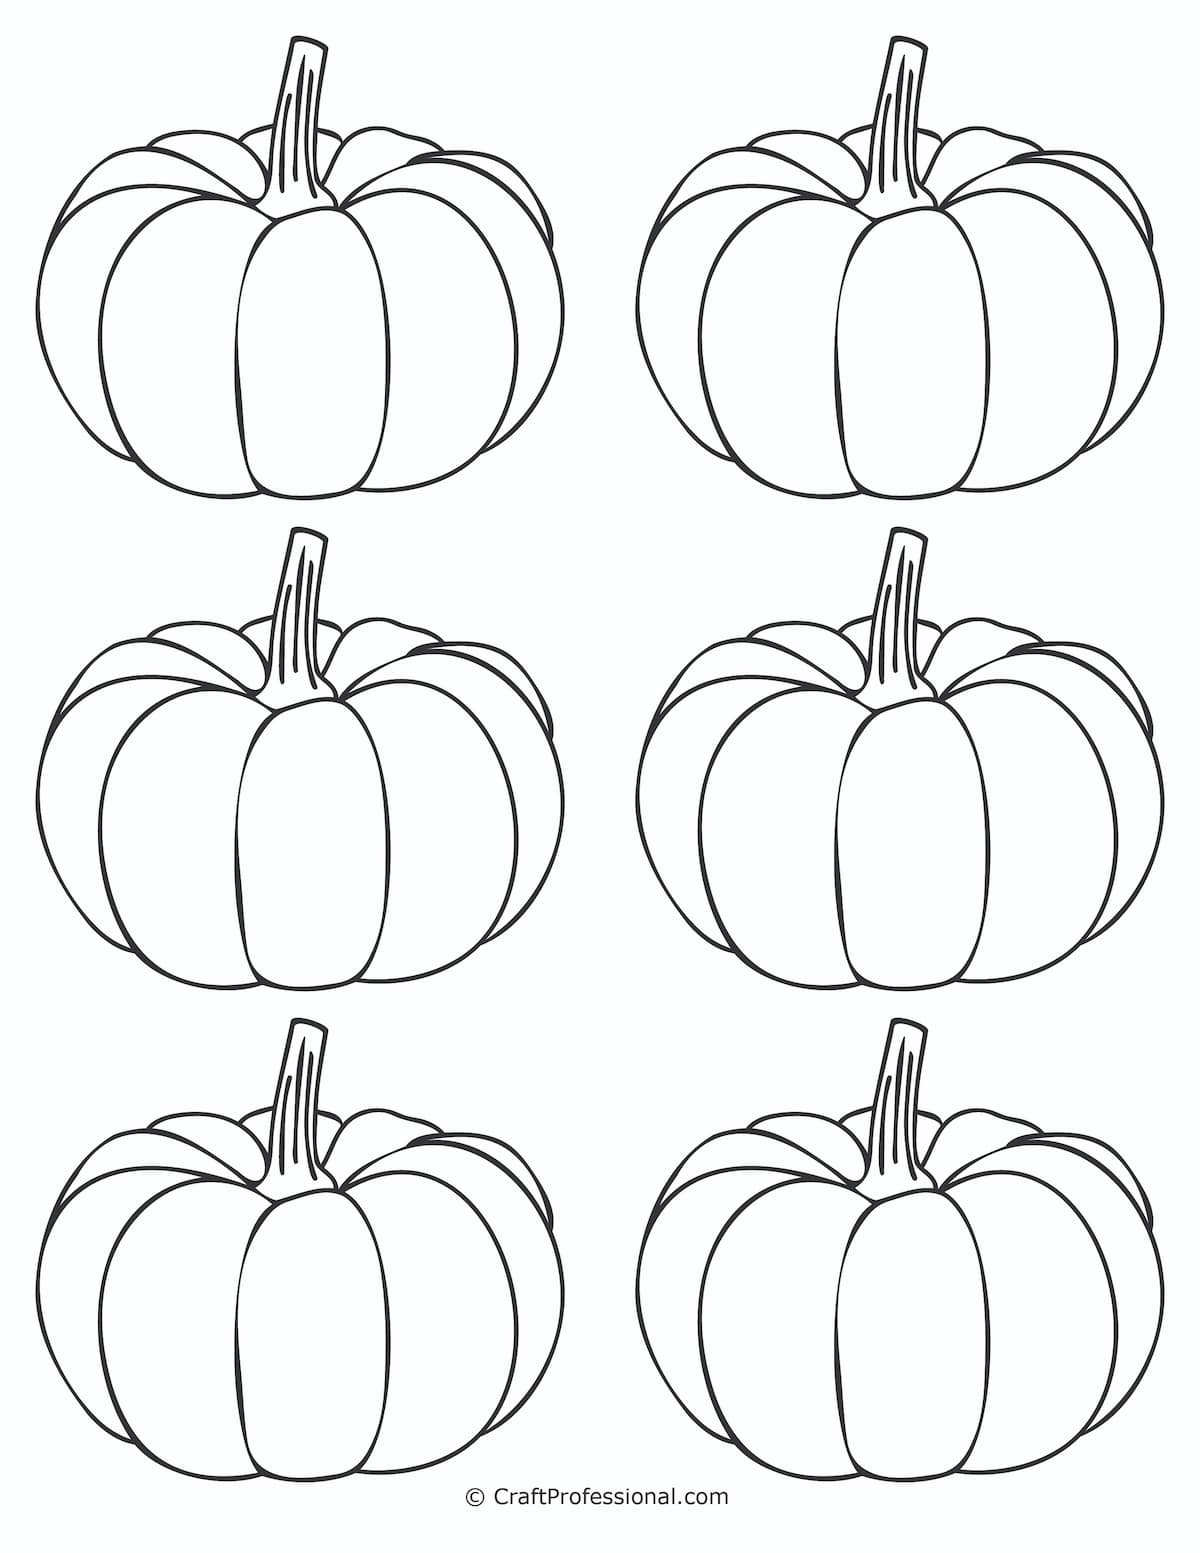 12 Pumpkin Coloring Pages Free Printables for Kids & Adults to Color